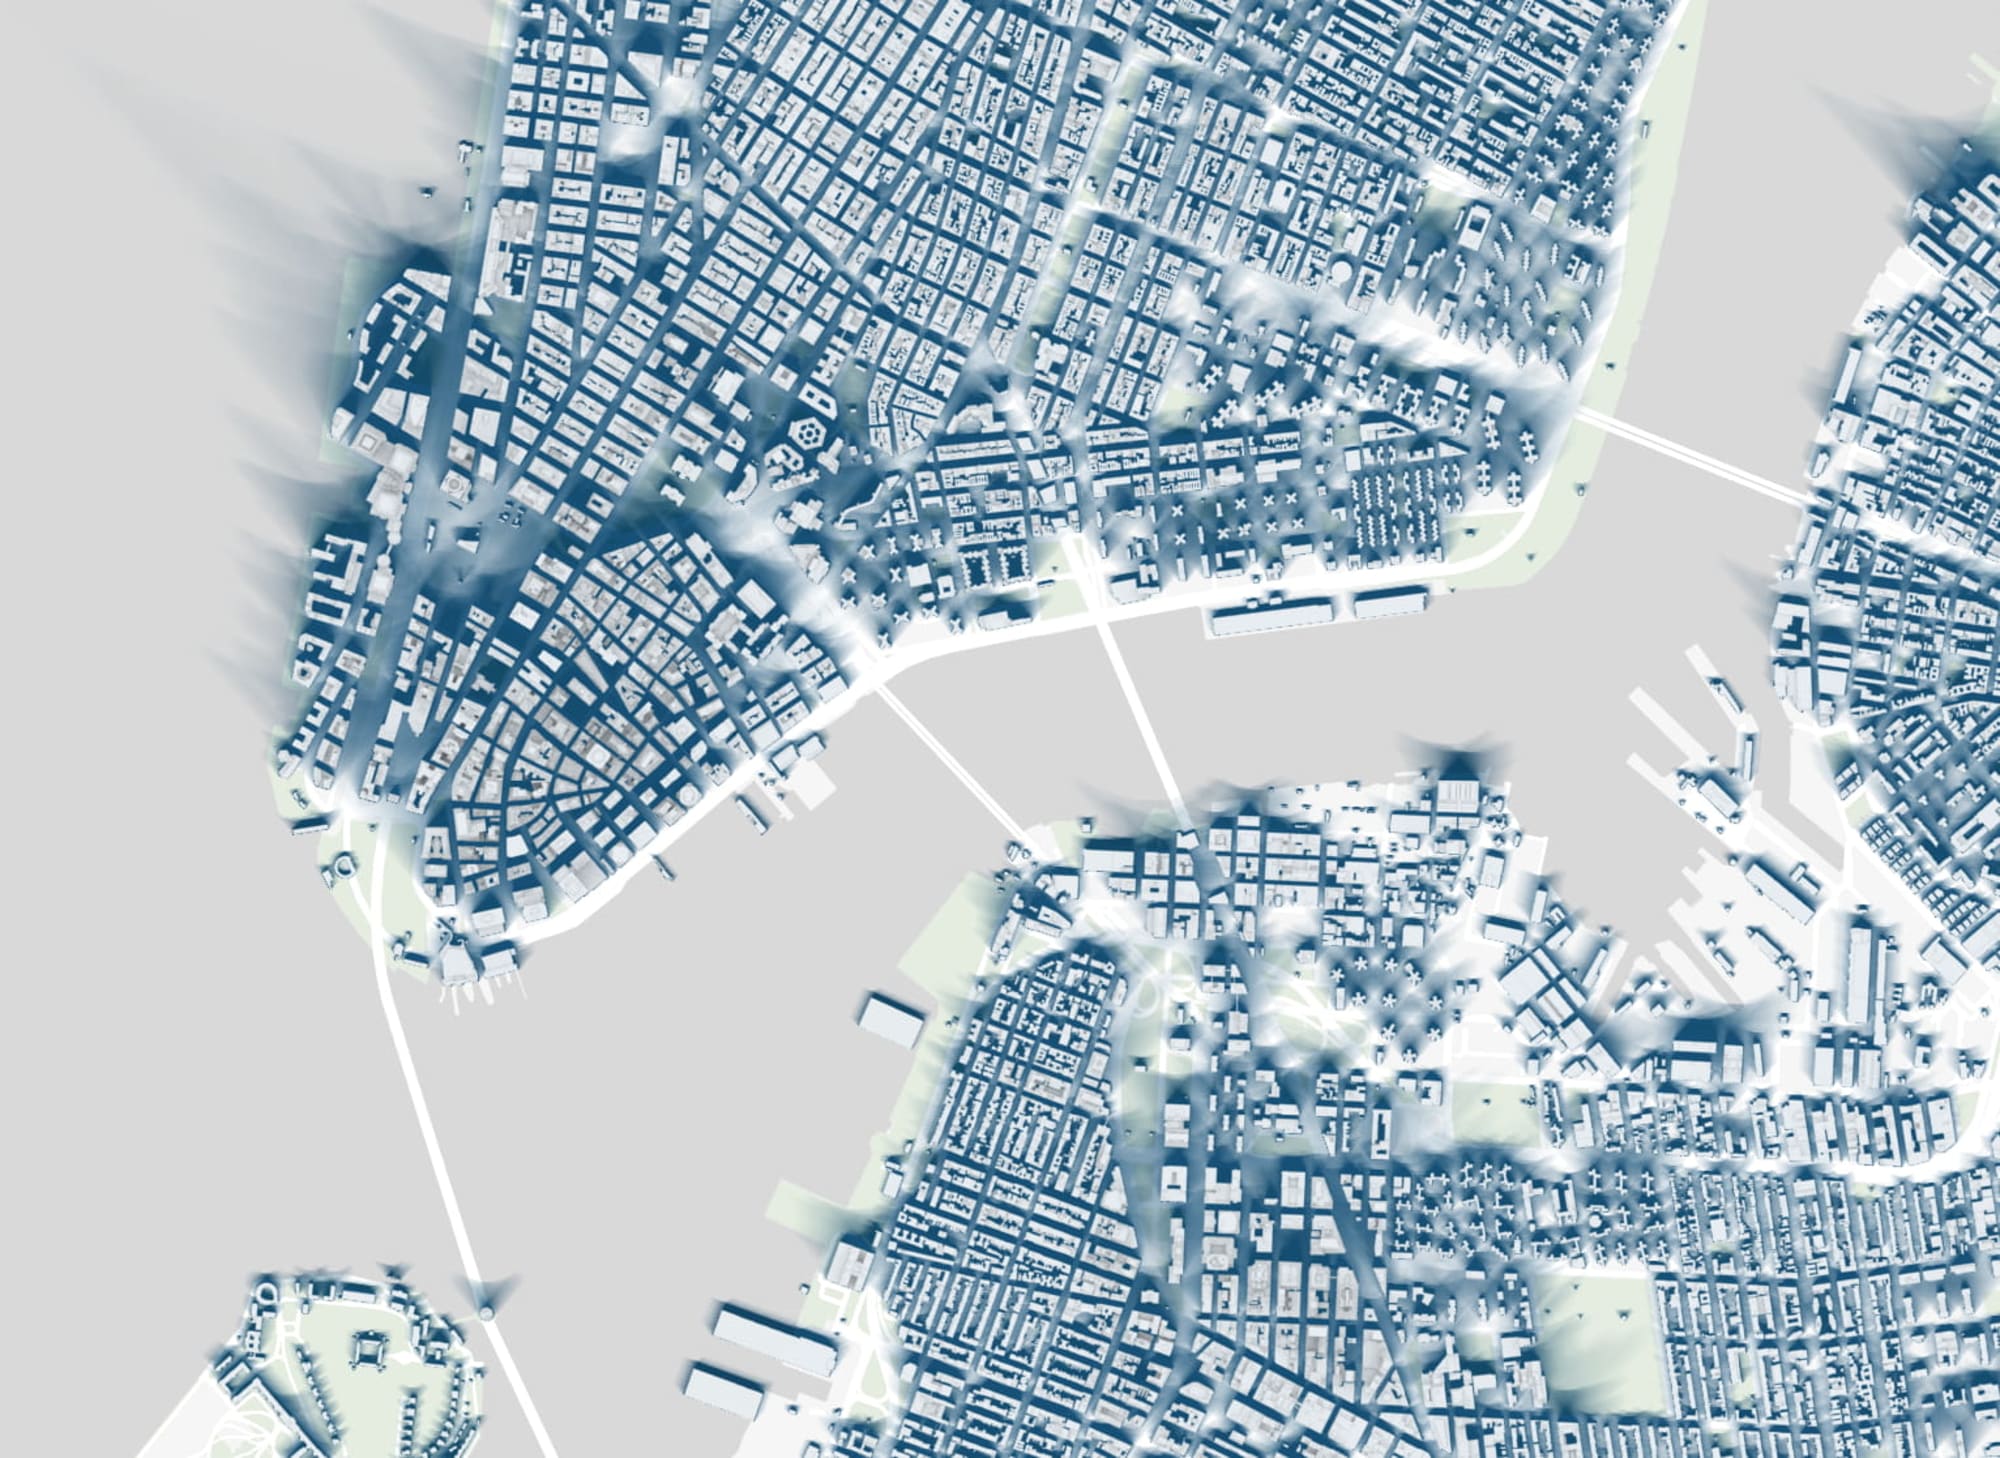 Mapping the shadows of New York City